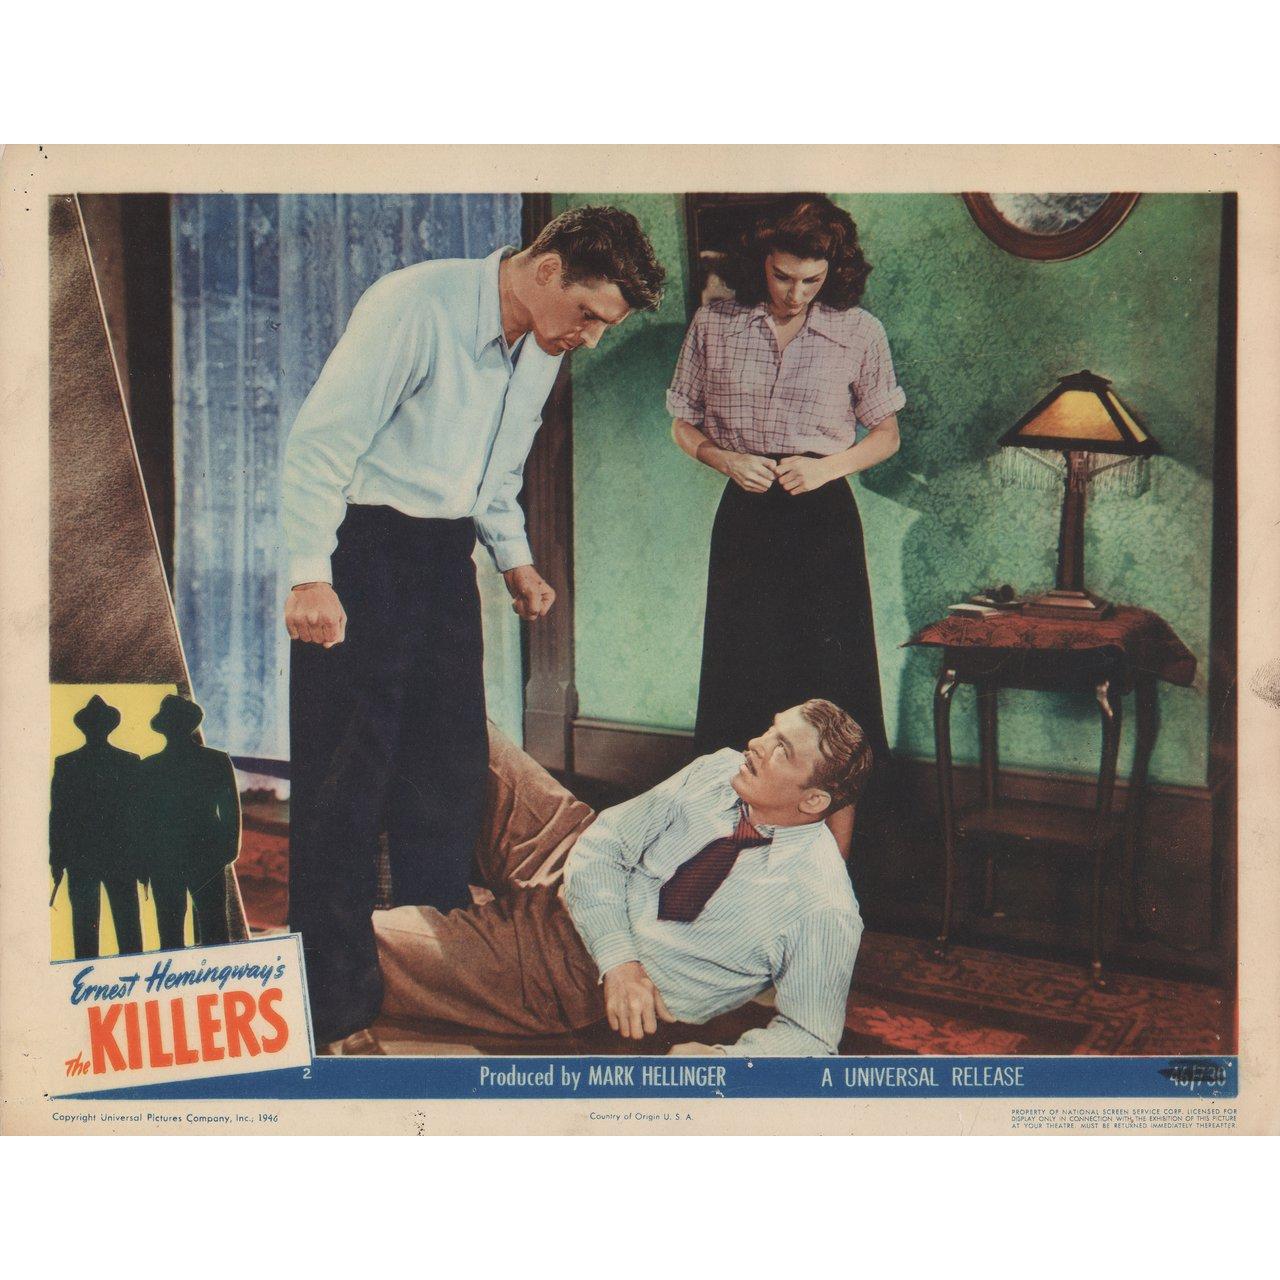 Original 1946 U.S. scene card for the film The Killers directed by Robert Siodmak with Burt Lancaster / Ava Gardner / Edmond O'Brien / Albert Dekker. Very Good-Fine condition. Please note: the size is stated in inches and the actual size can vary by